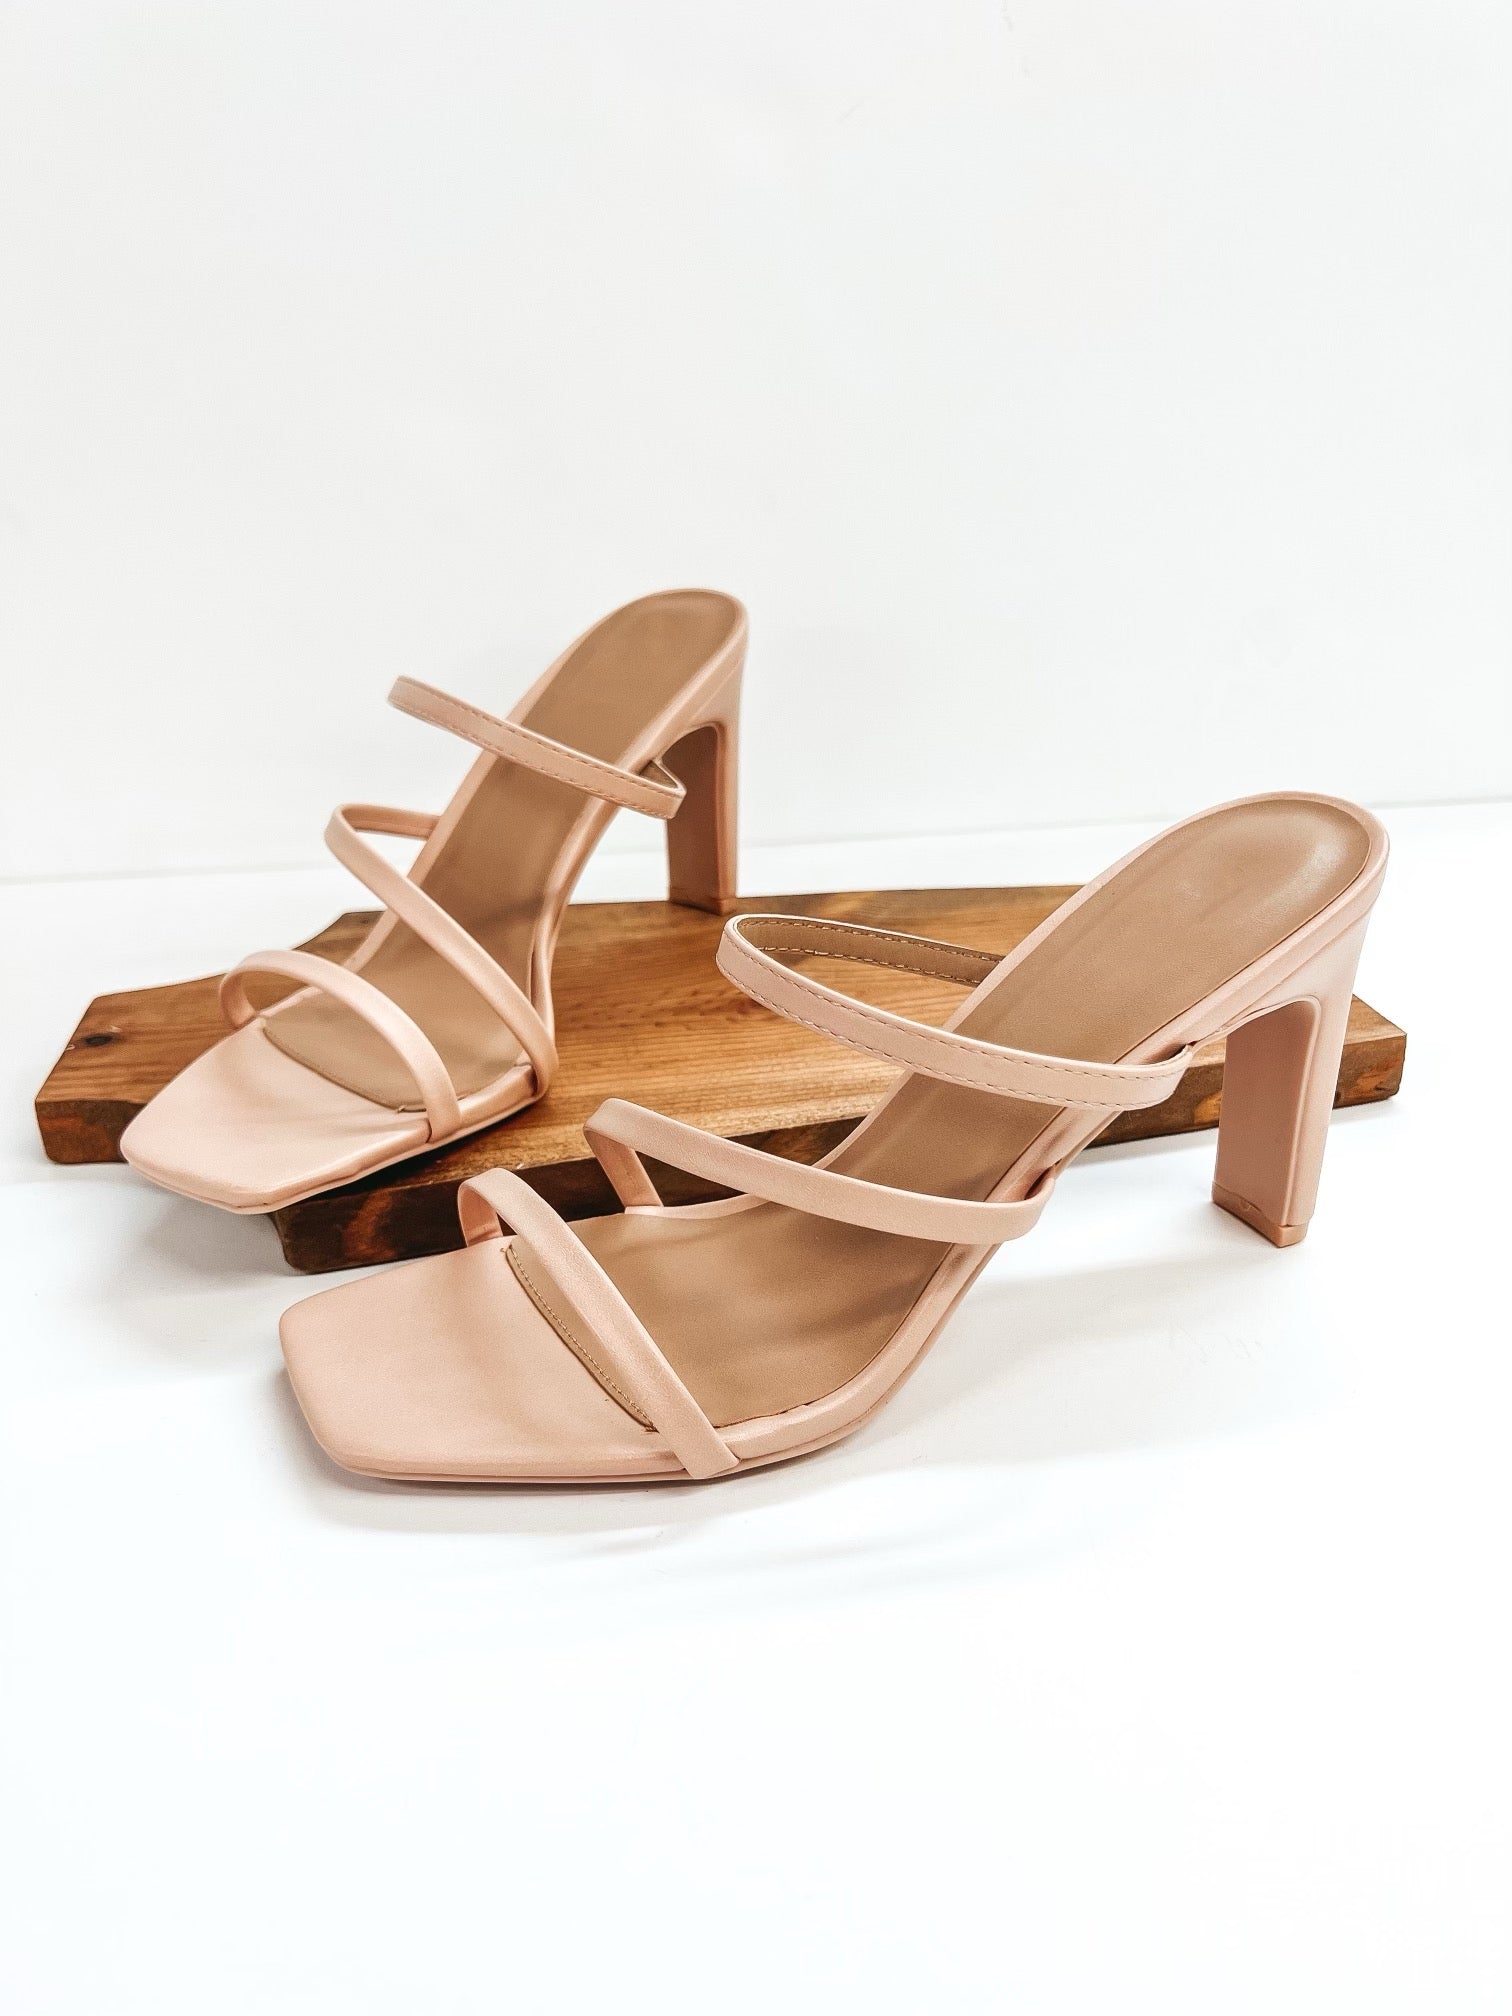 Upper West Side Strappy Heeled Sandals in Nude